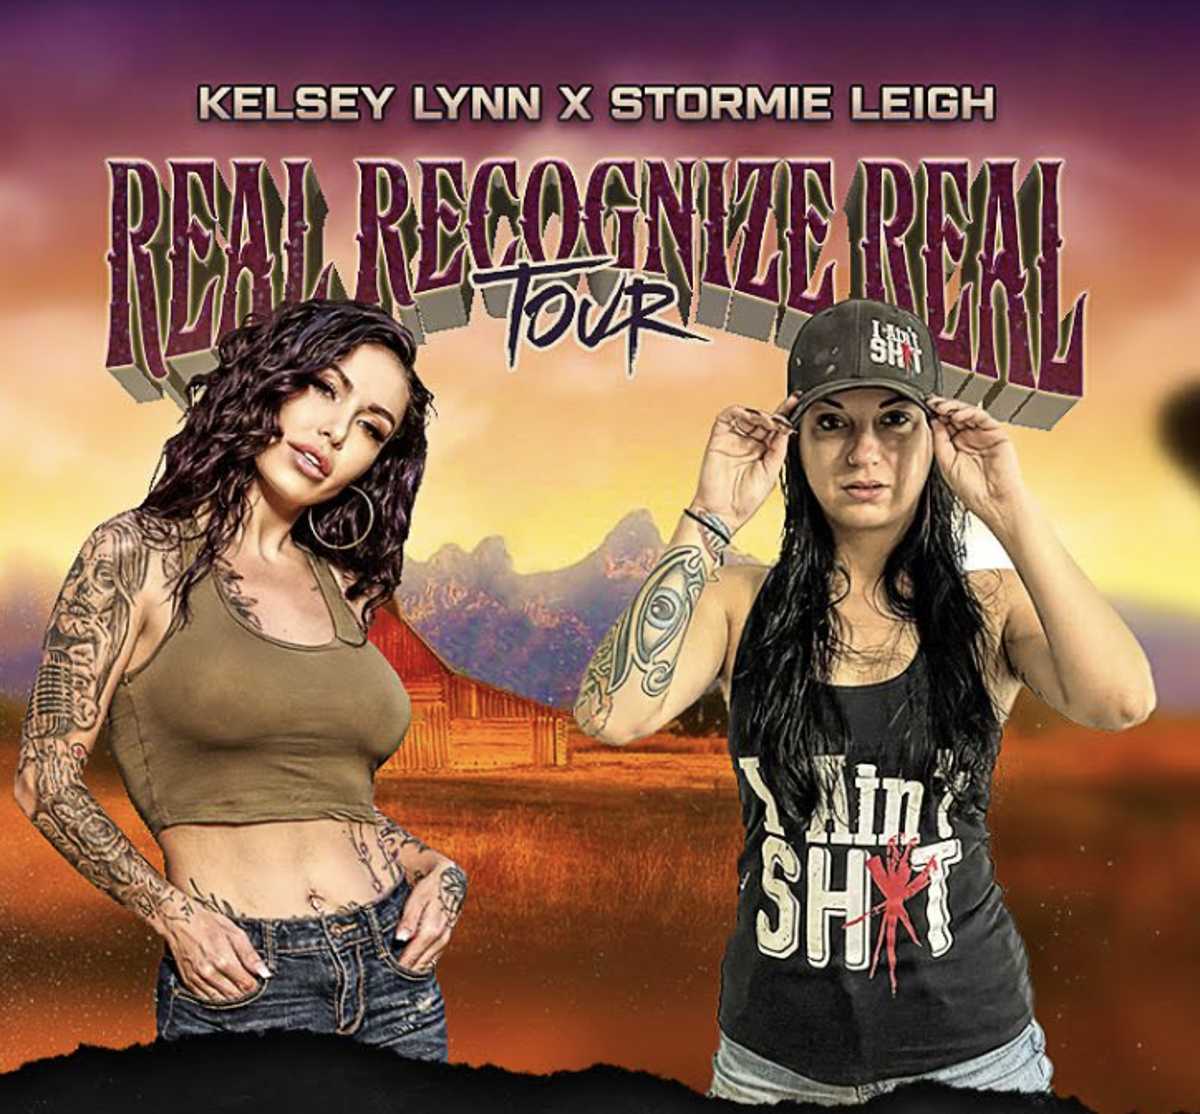 Kelsey Lynn & Stormie Leigh: Real Recognize Real Tour